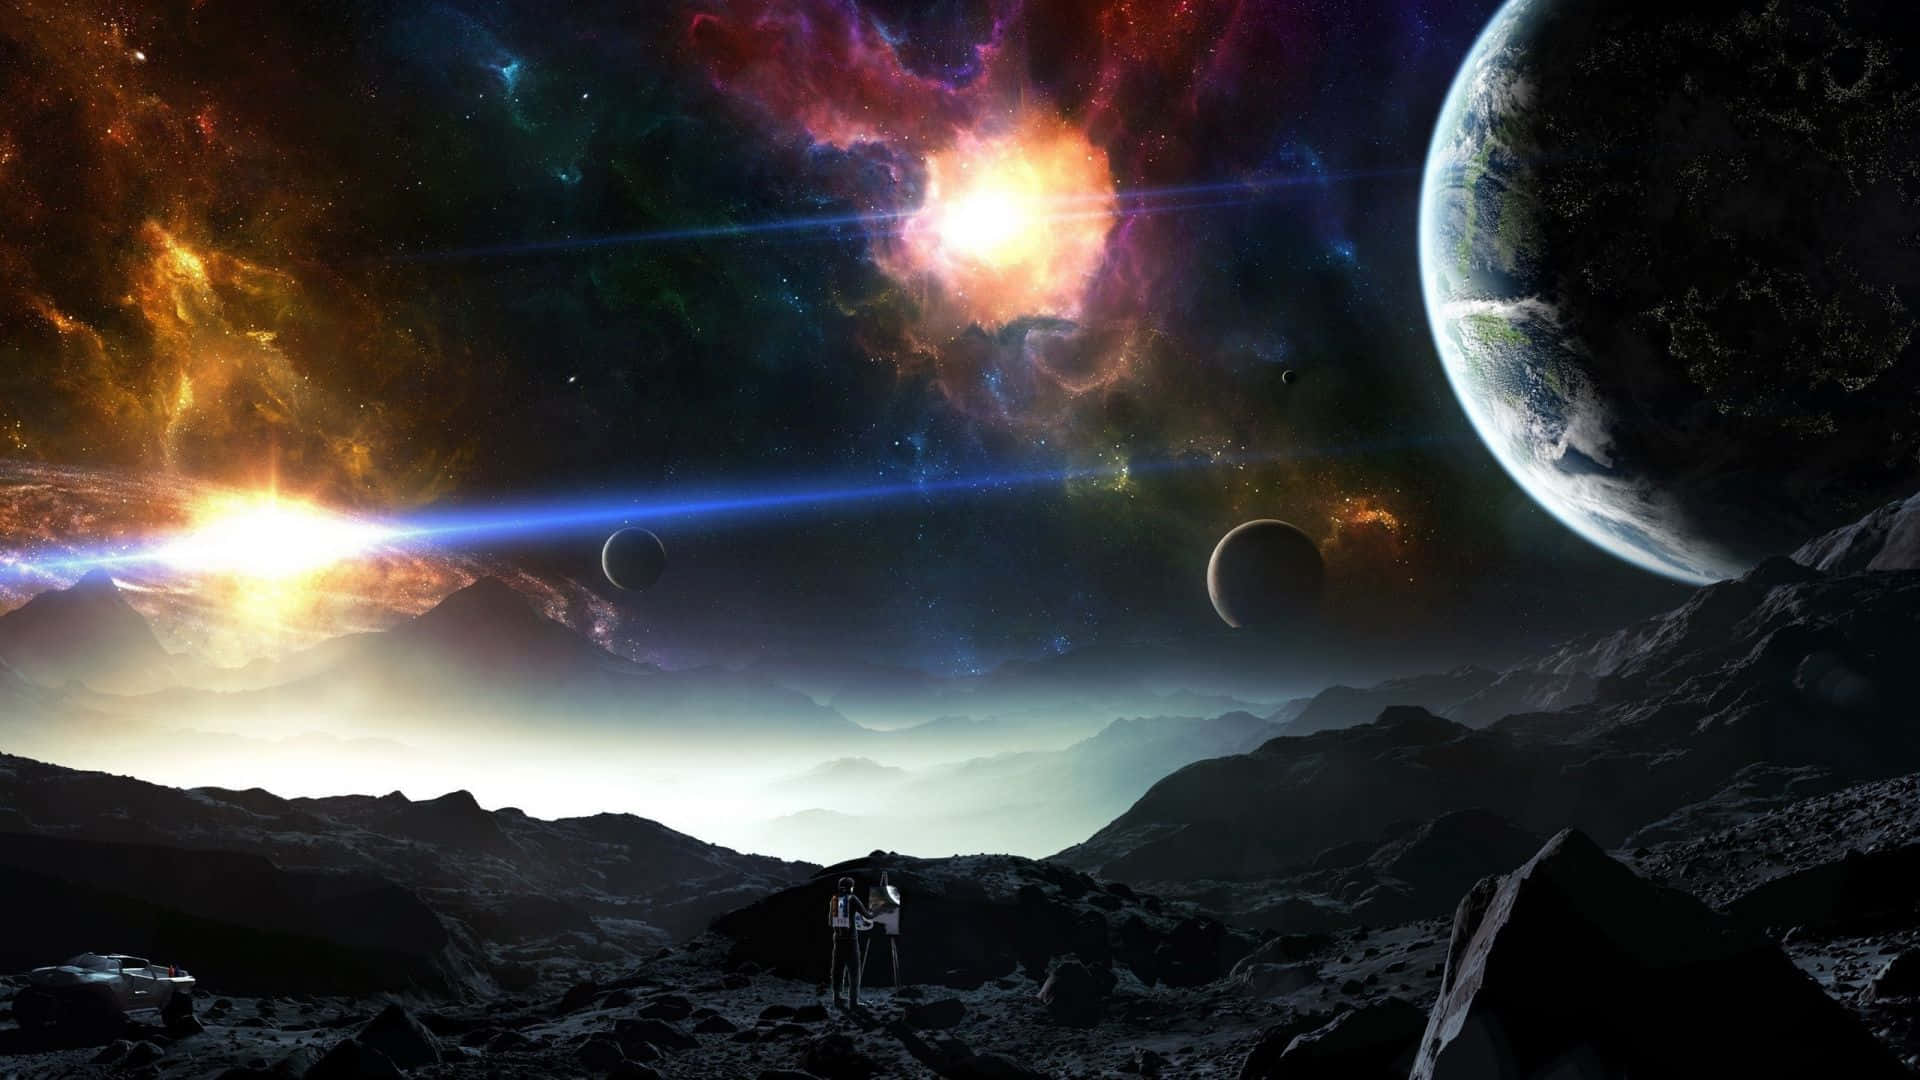 The beauty of a celestial dreamscape Wallpaper